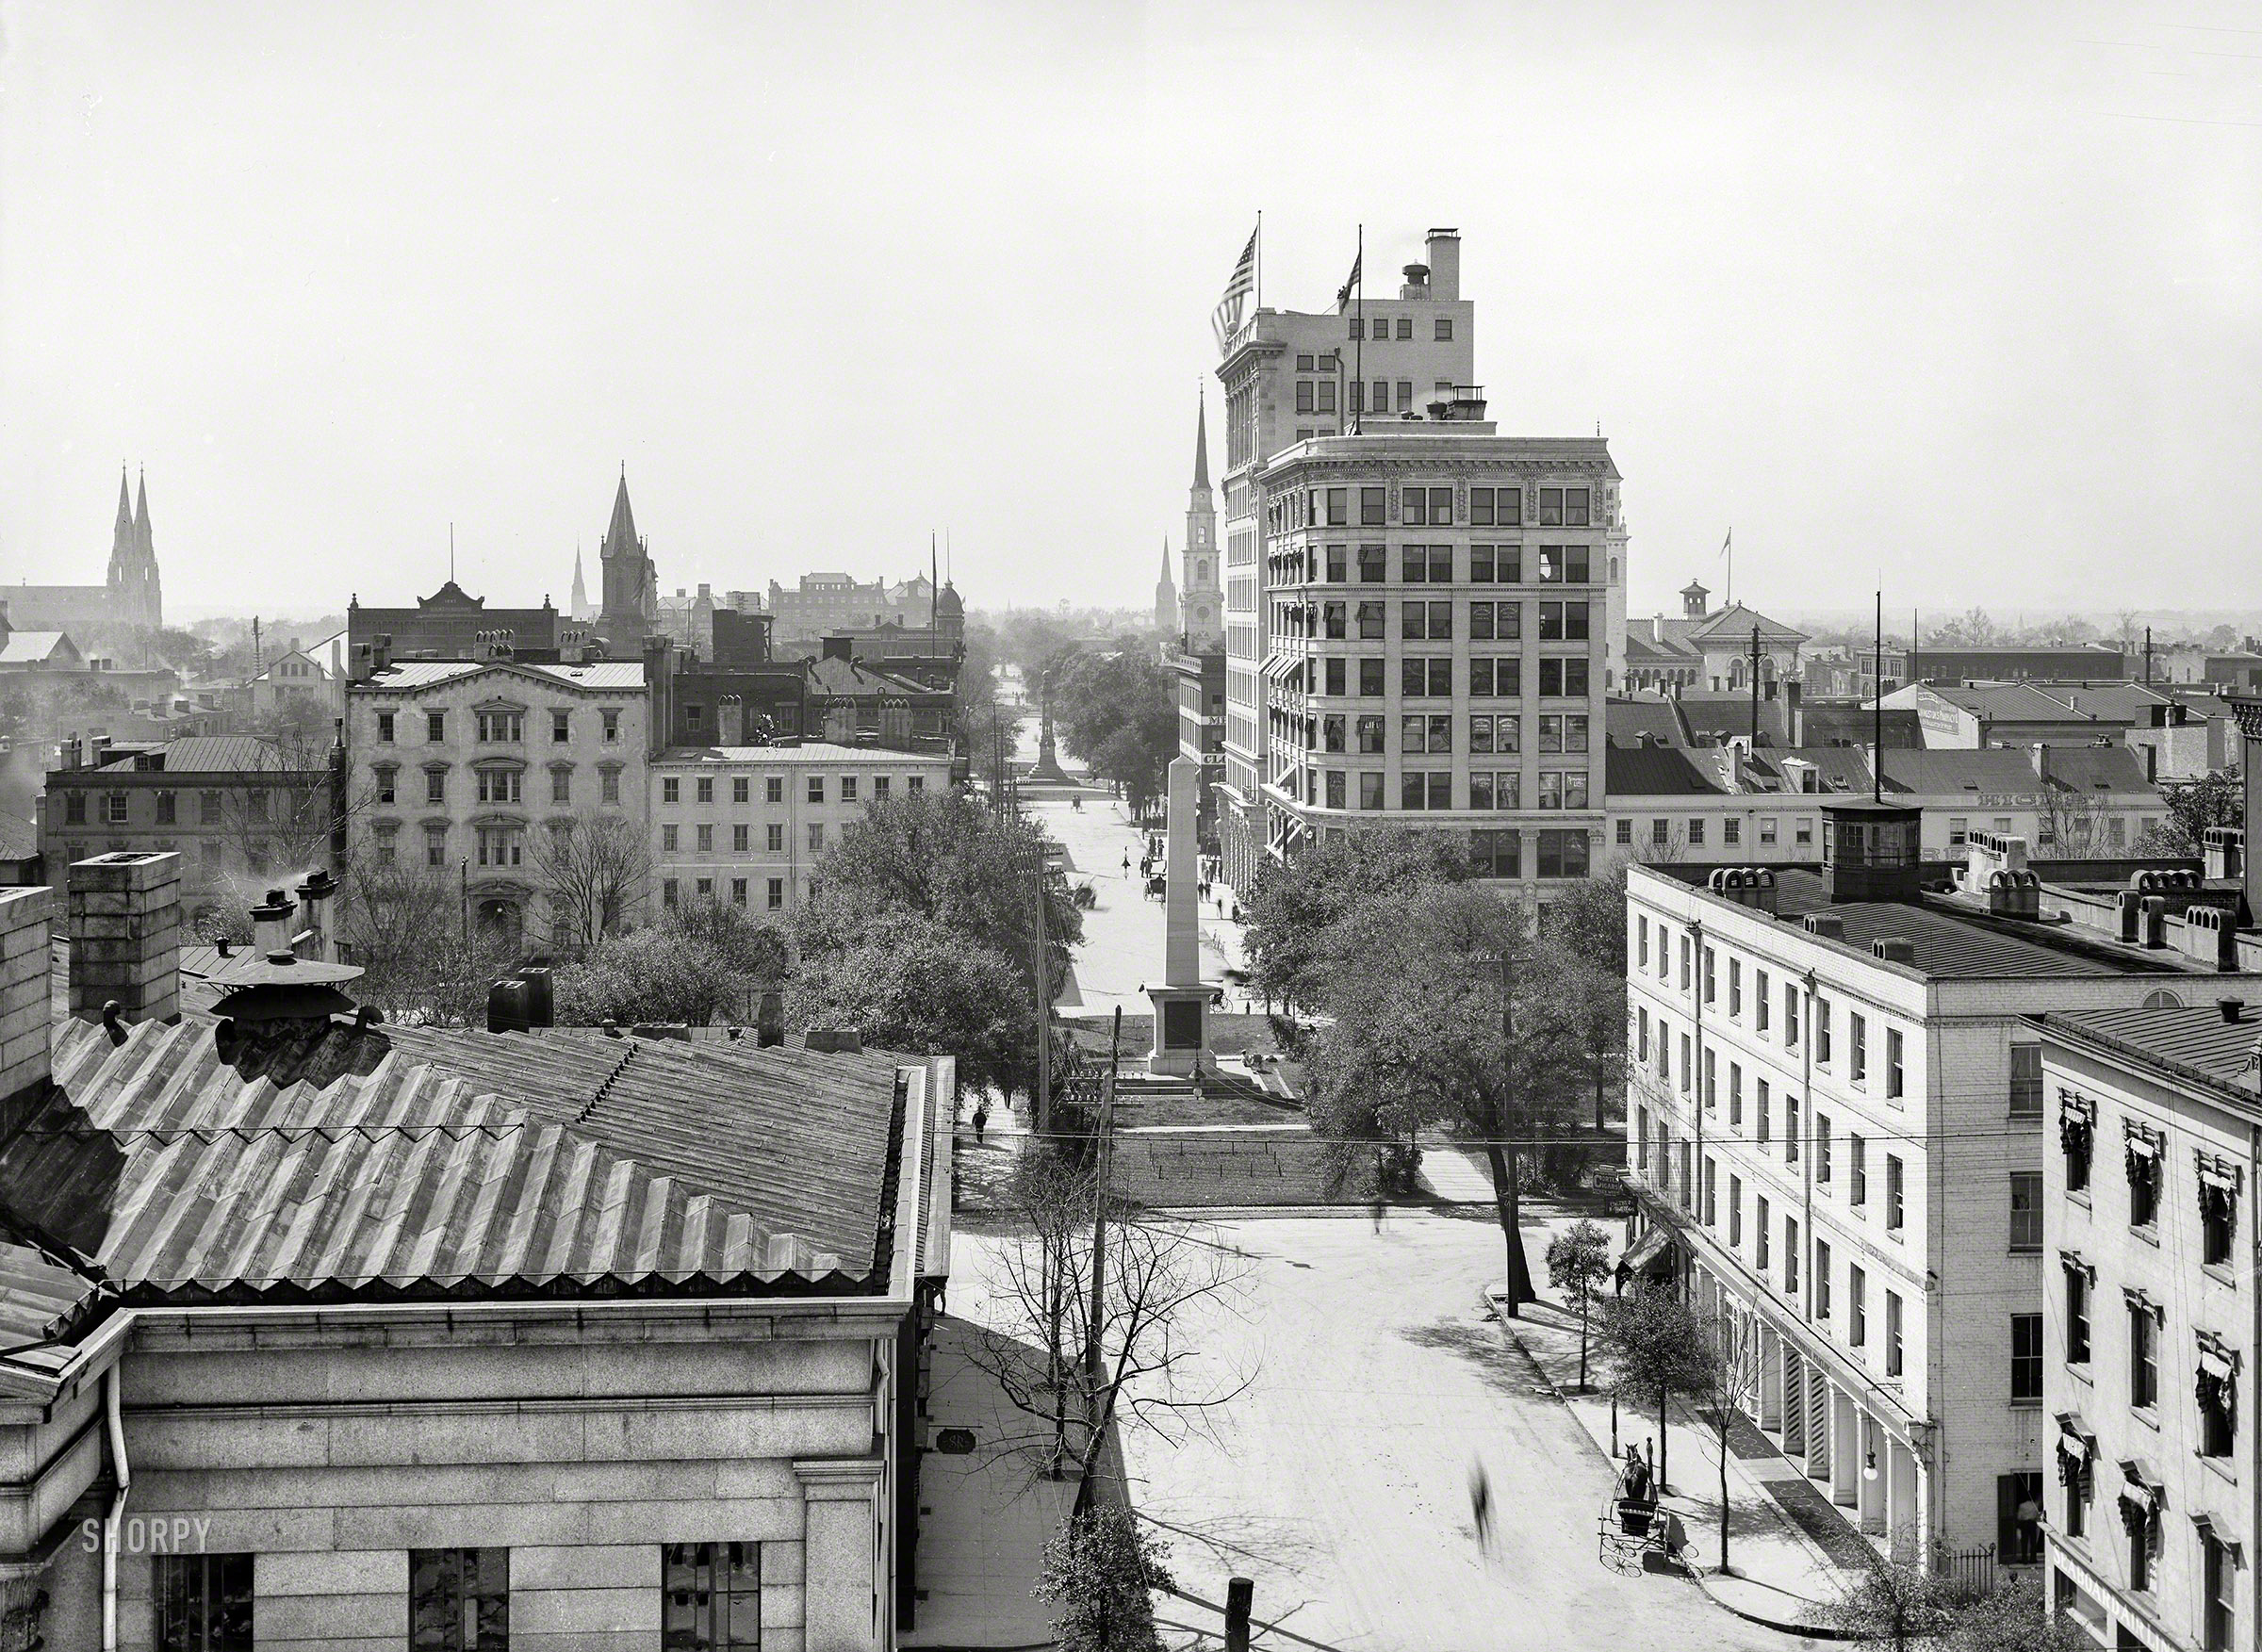 Savannah, Georgia, circa 1906. "Bull Street and Johnson Square -- National Bank of Savannah." With a supporting role played by the Pulaski House Tonsorial Parlor. 5x7 inch dry plate glass negative, Detroit Publishing Company. View full size.